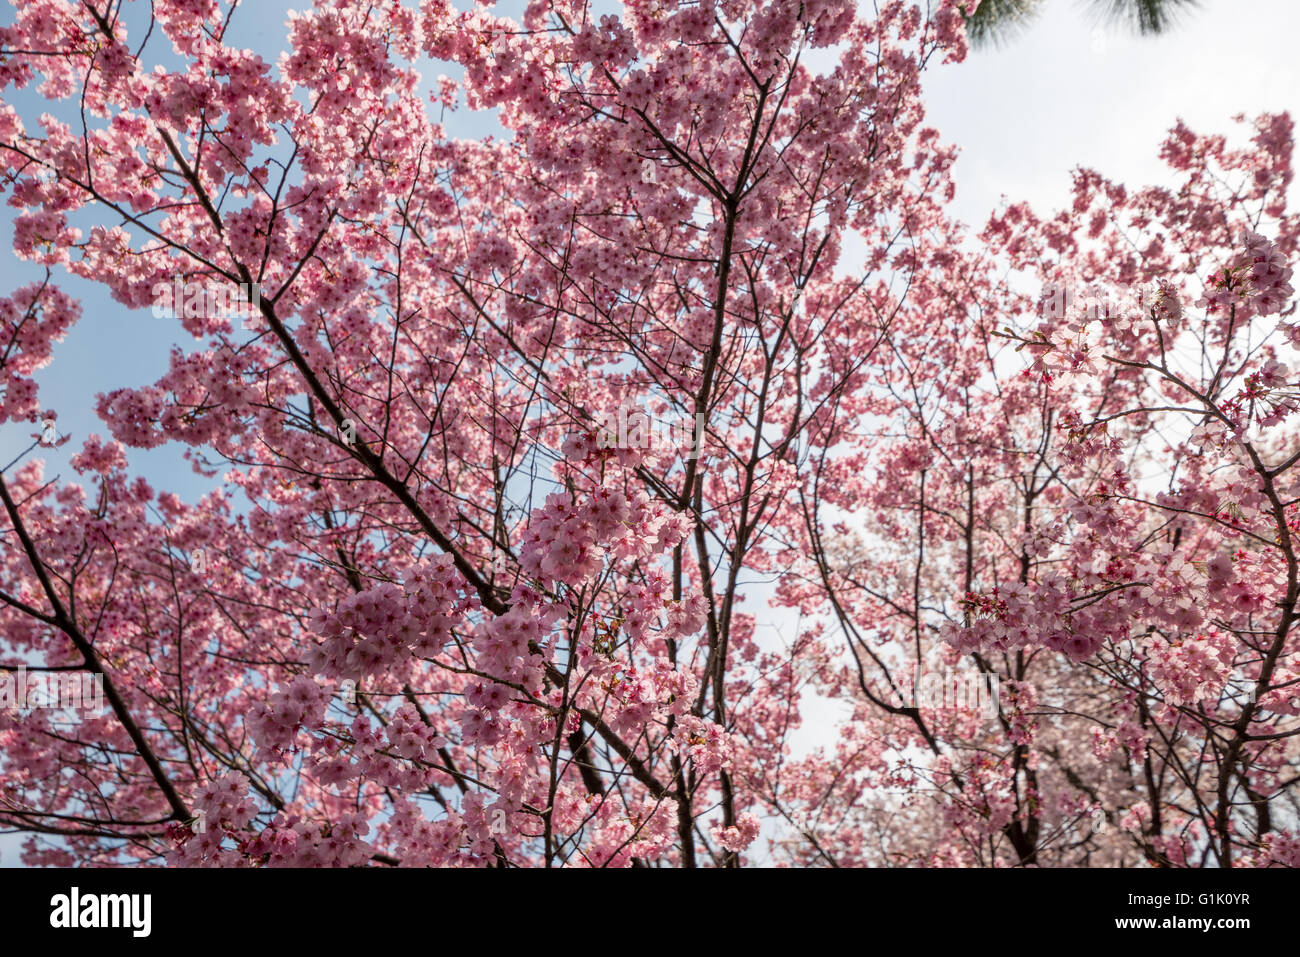 Pink and white colored cherry blossoms on tree Stock Photo